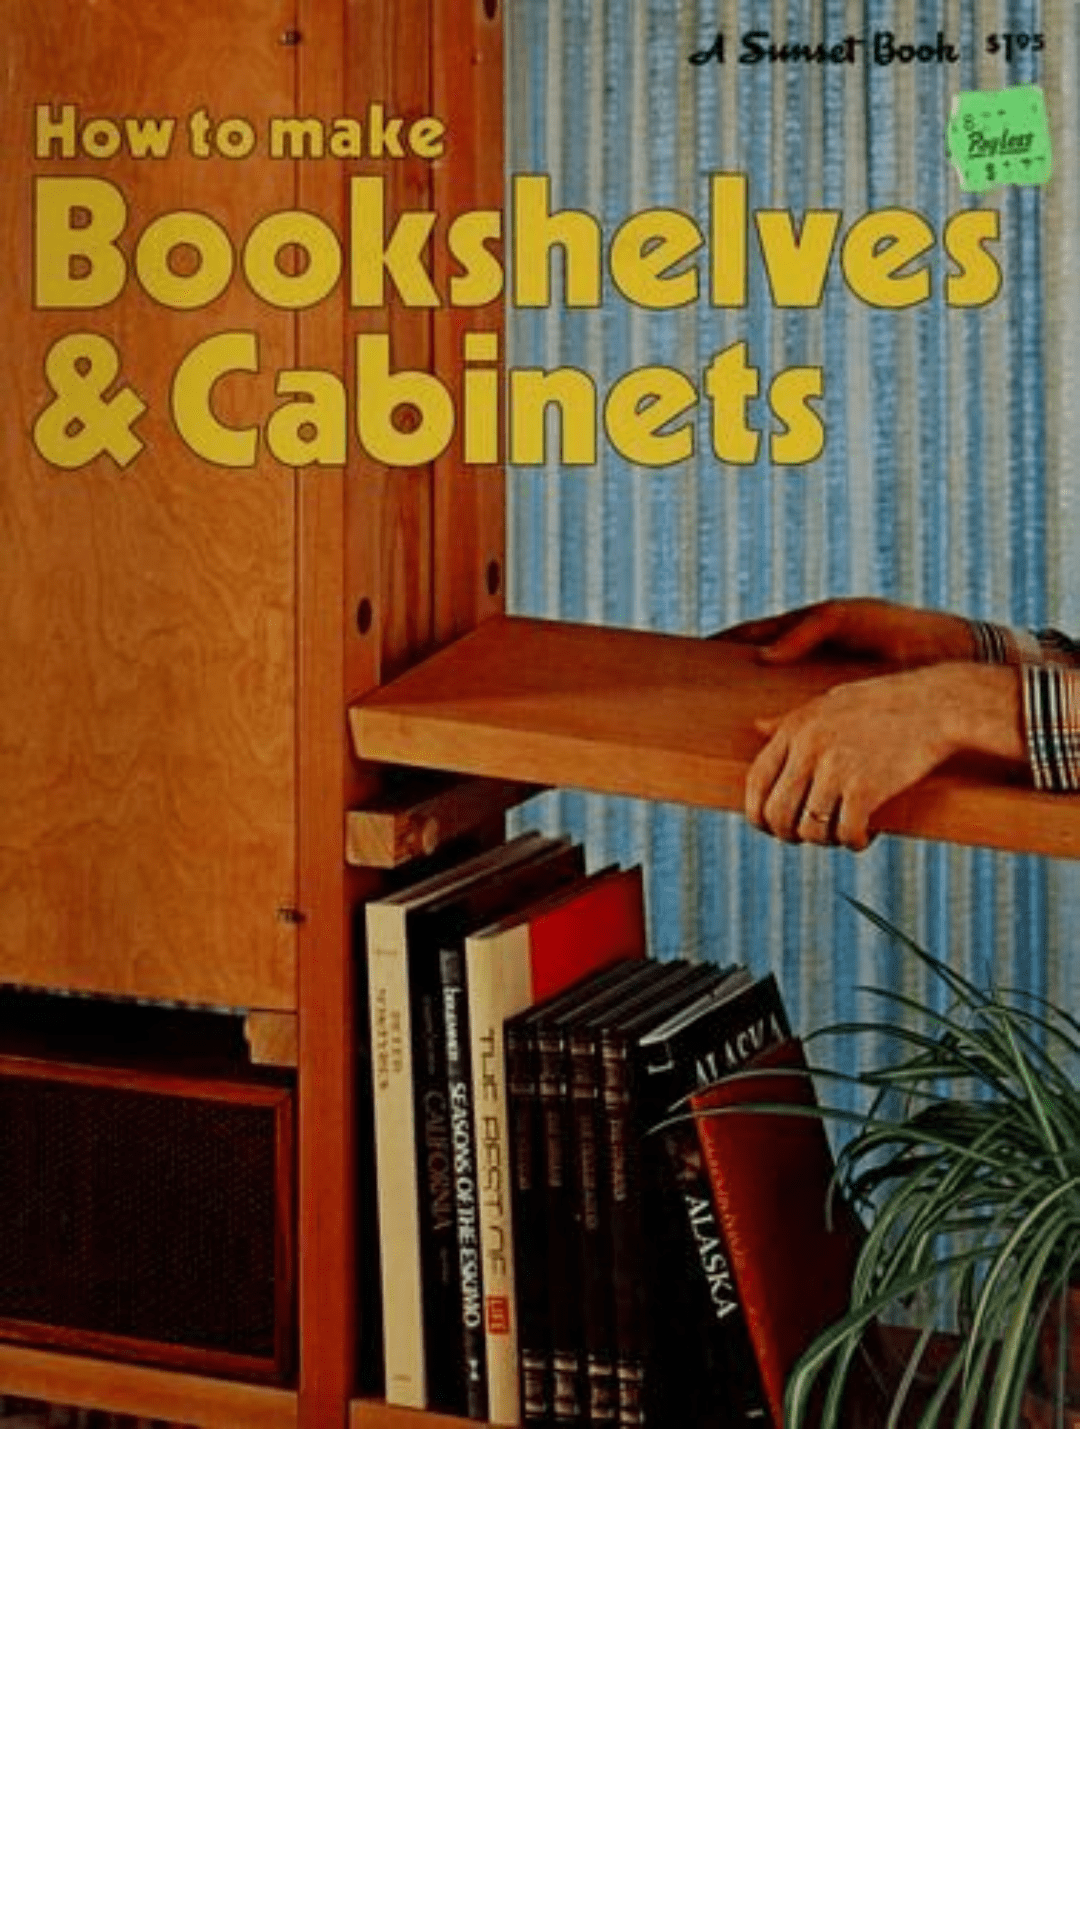 How to Make Bookshelves and Cabinets